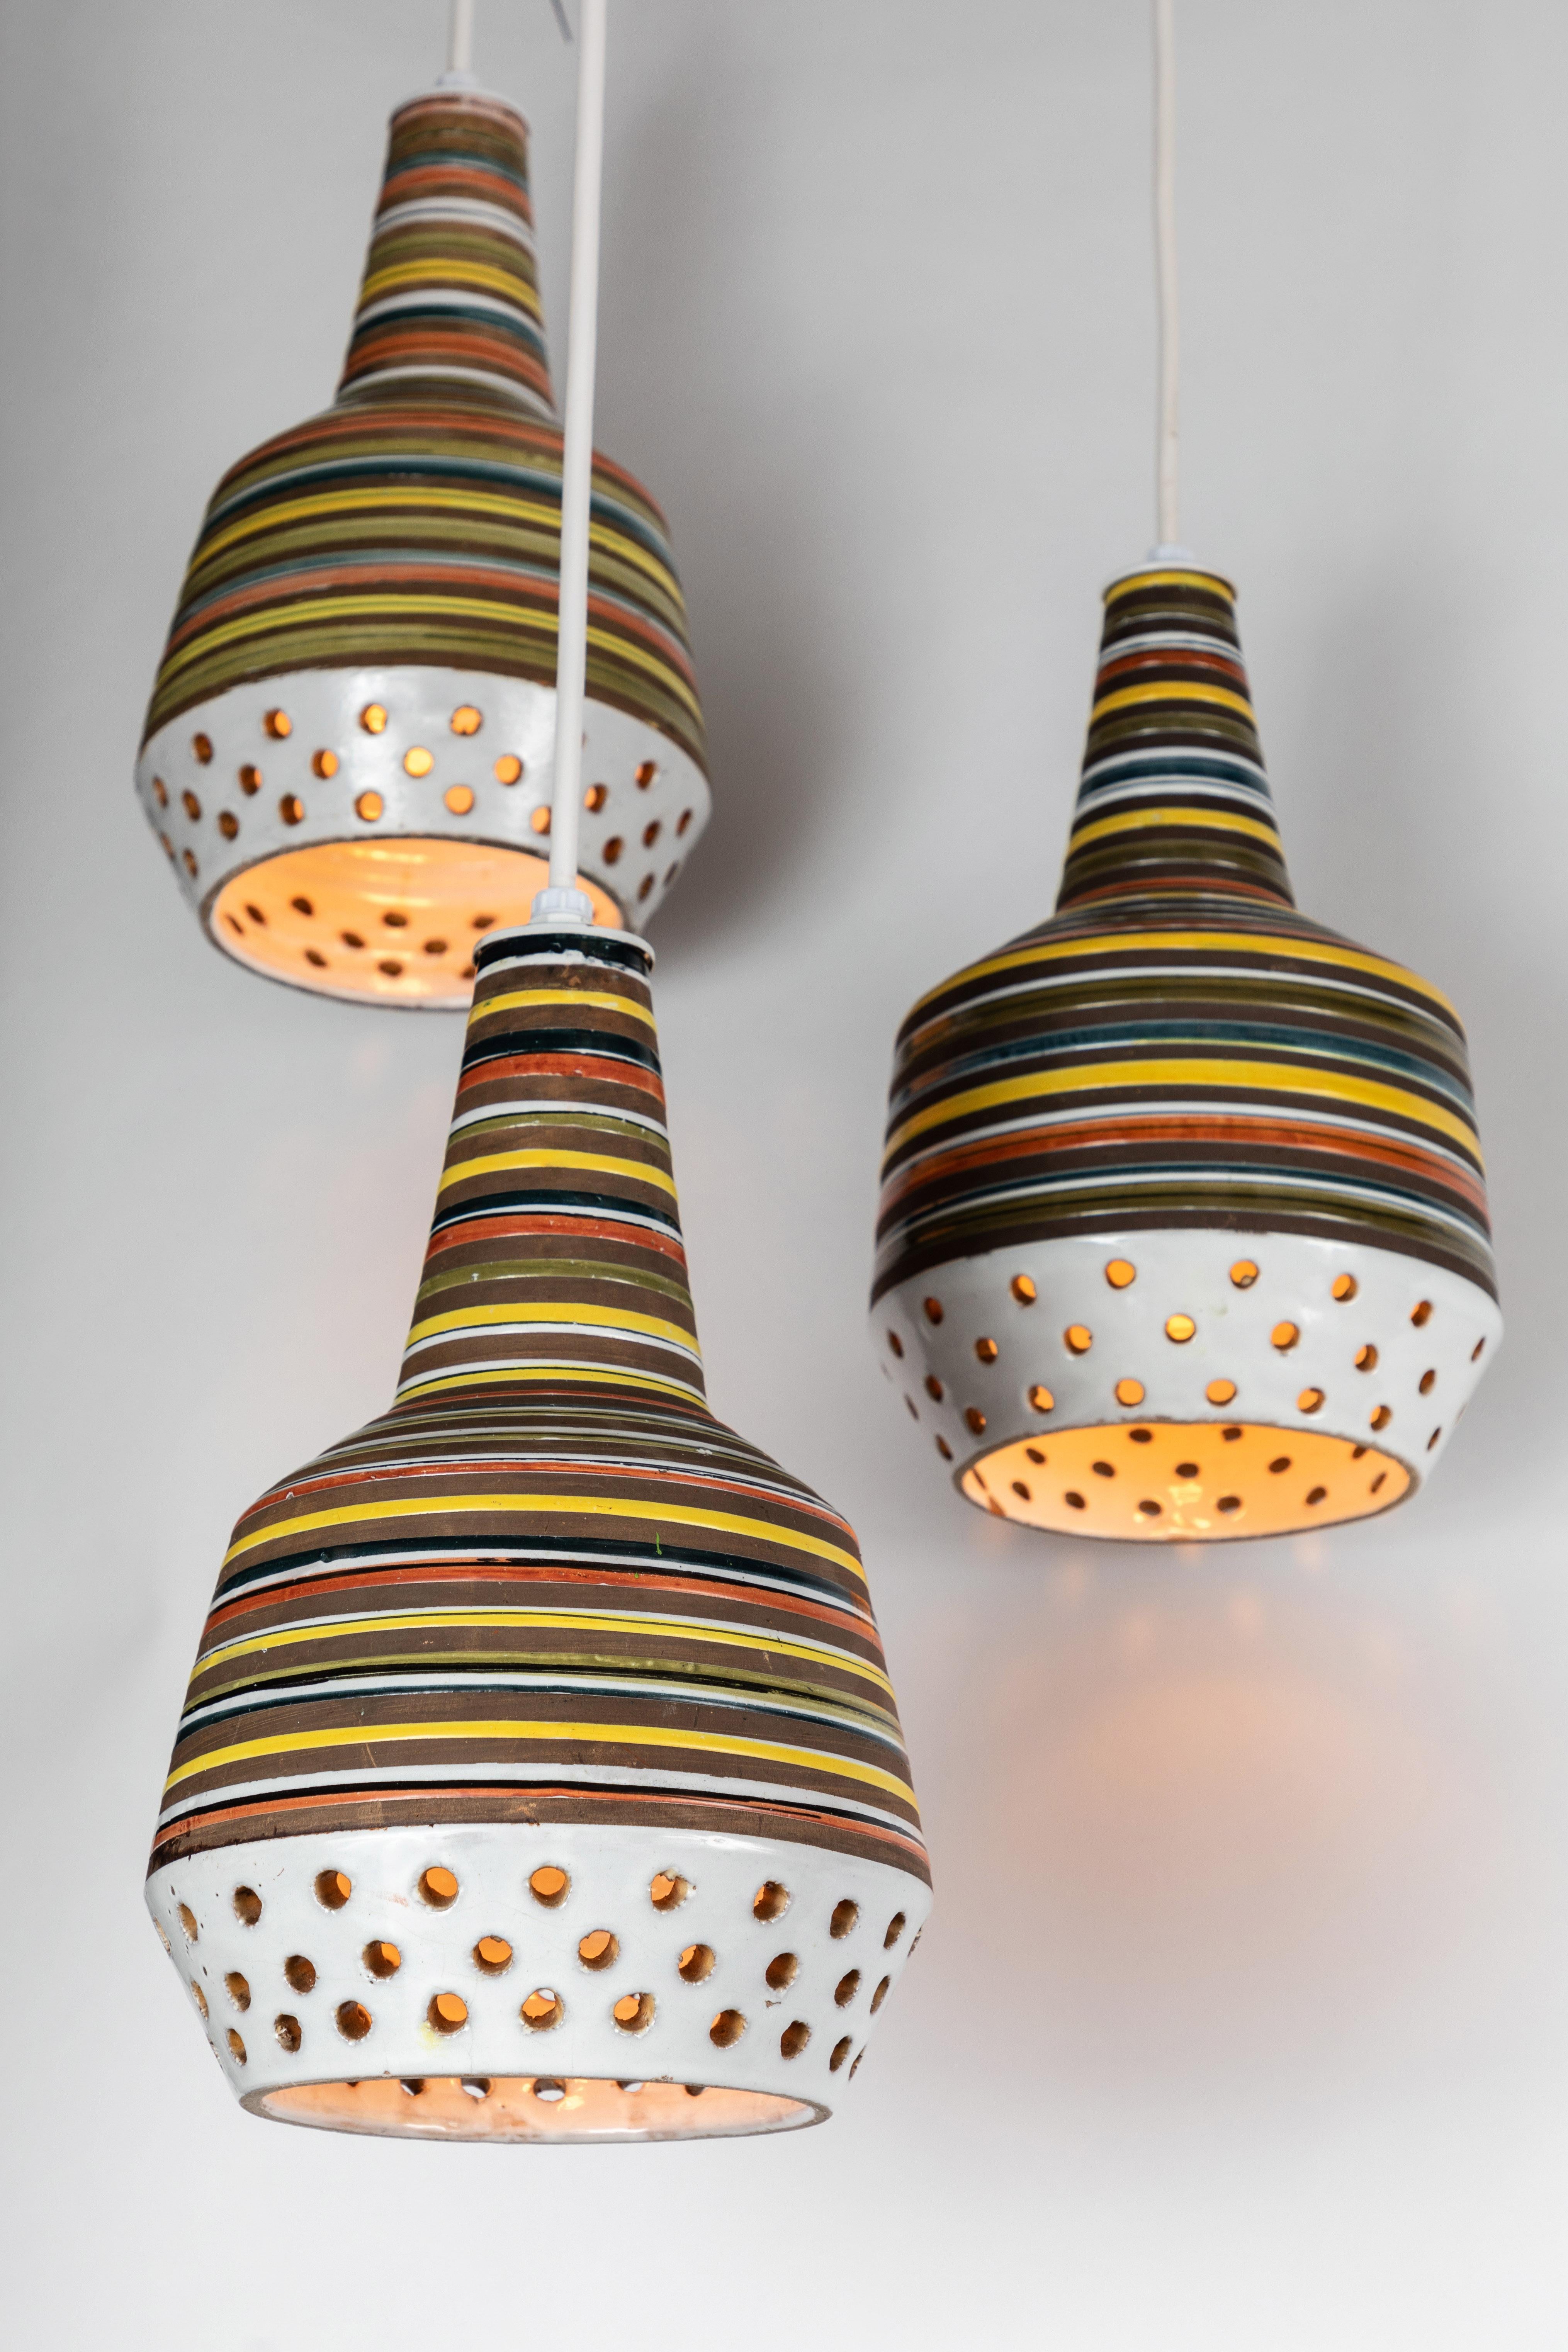 1950s Aldo Londi ceramic Bitossi pendant lamp for Italian Raymor. This rare and sculptural Italian ceramic lamp is executed with multicolored glazed horizontal stripes and geometric circular perforations.

Please note, two lamps available.

Ceramic